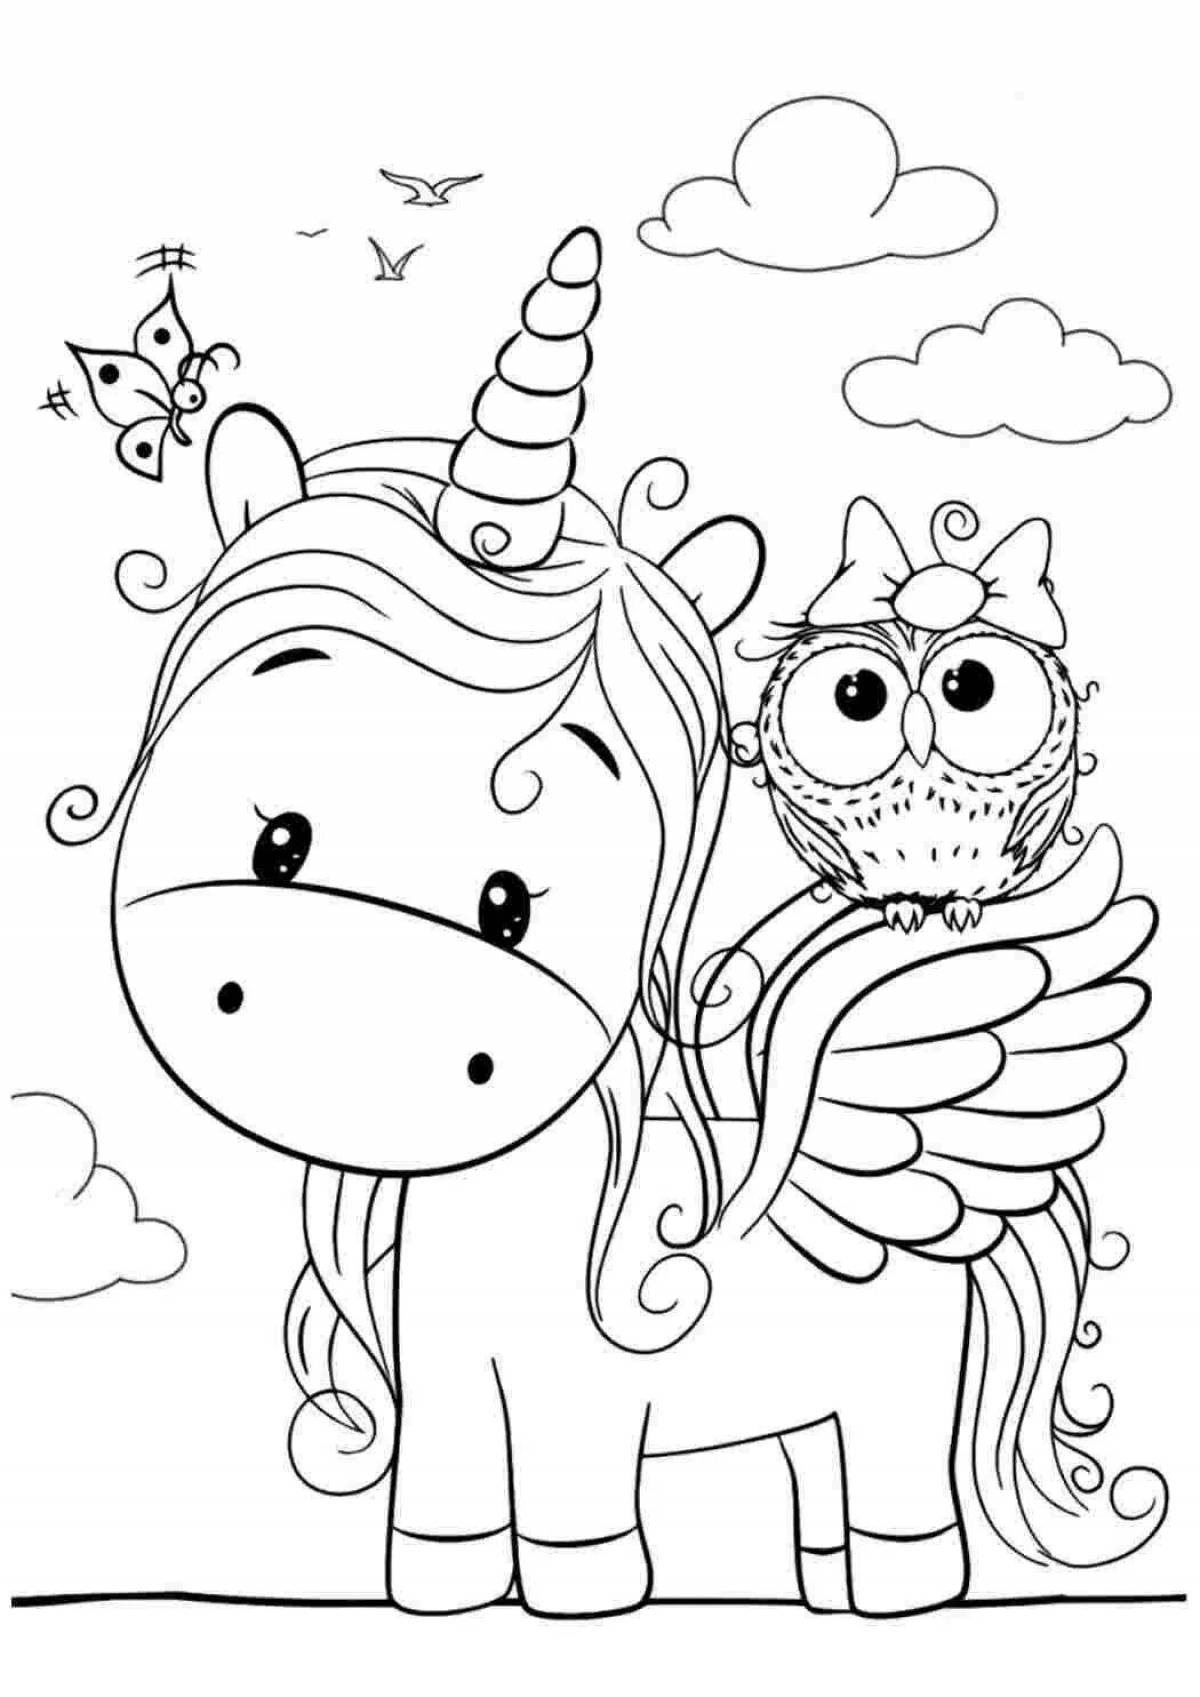 Amazing coloring pages for kids 6-7 years old for girls animals